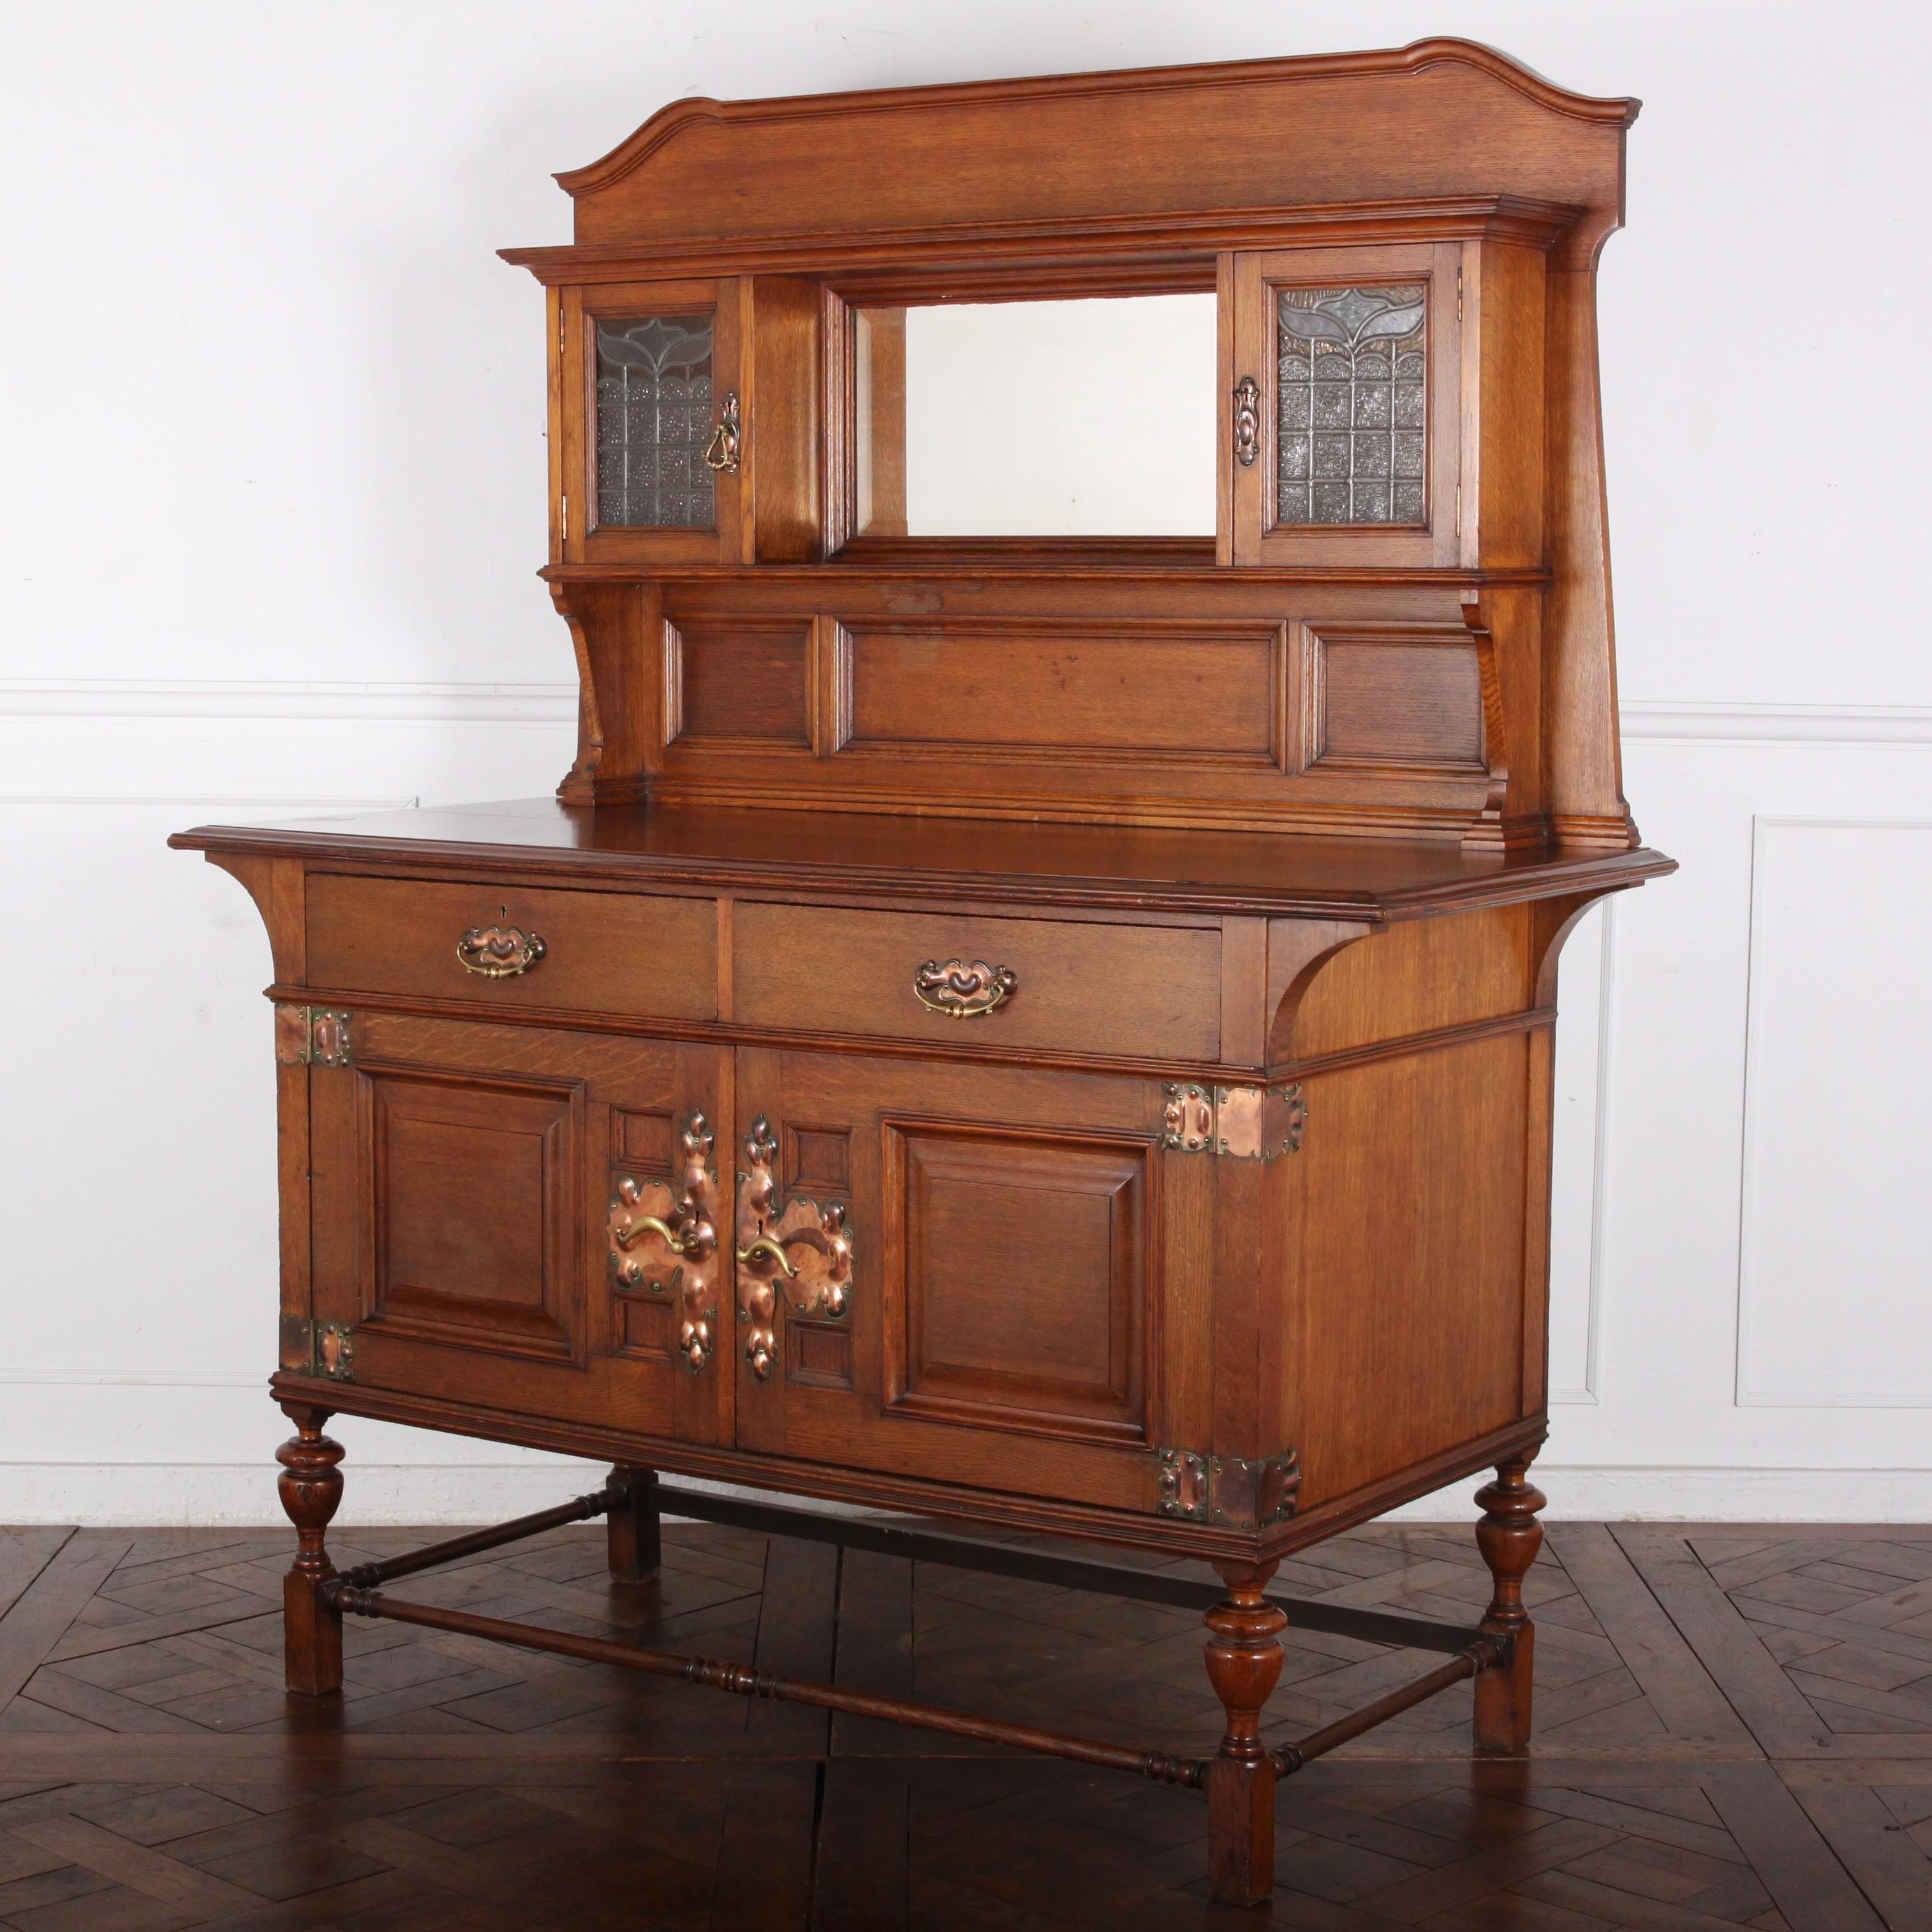 An English Arts & Crafts / Art Nouveau buffet with distinctive copper hardware and leaded-glass upper doors.
A very well-made piece with solid mahogany as the ‘secondary wood’ and handcut joinery throughout.
Signed ‘Maple and Company’.

  